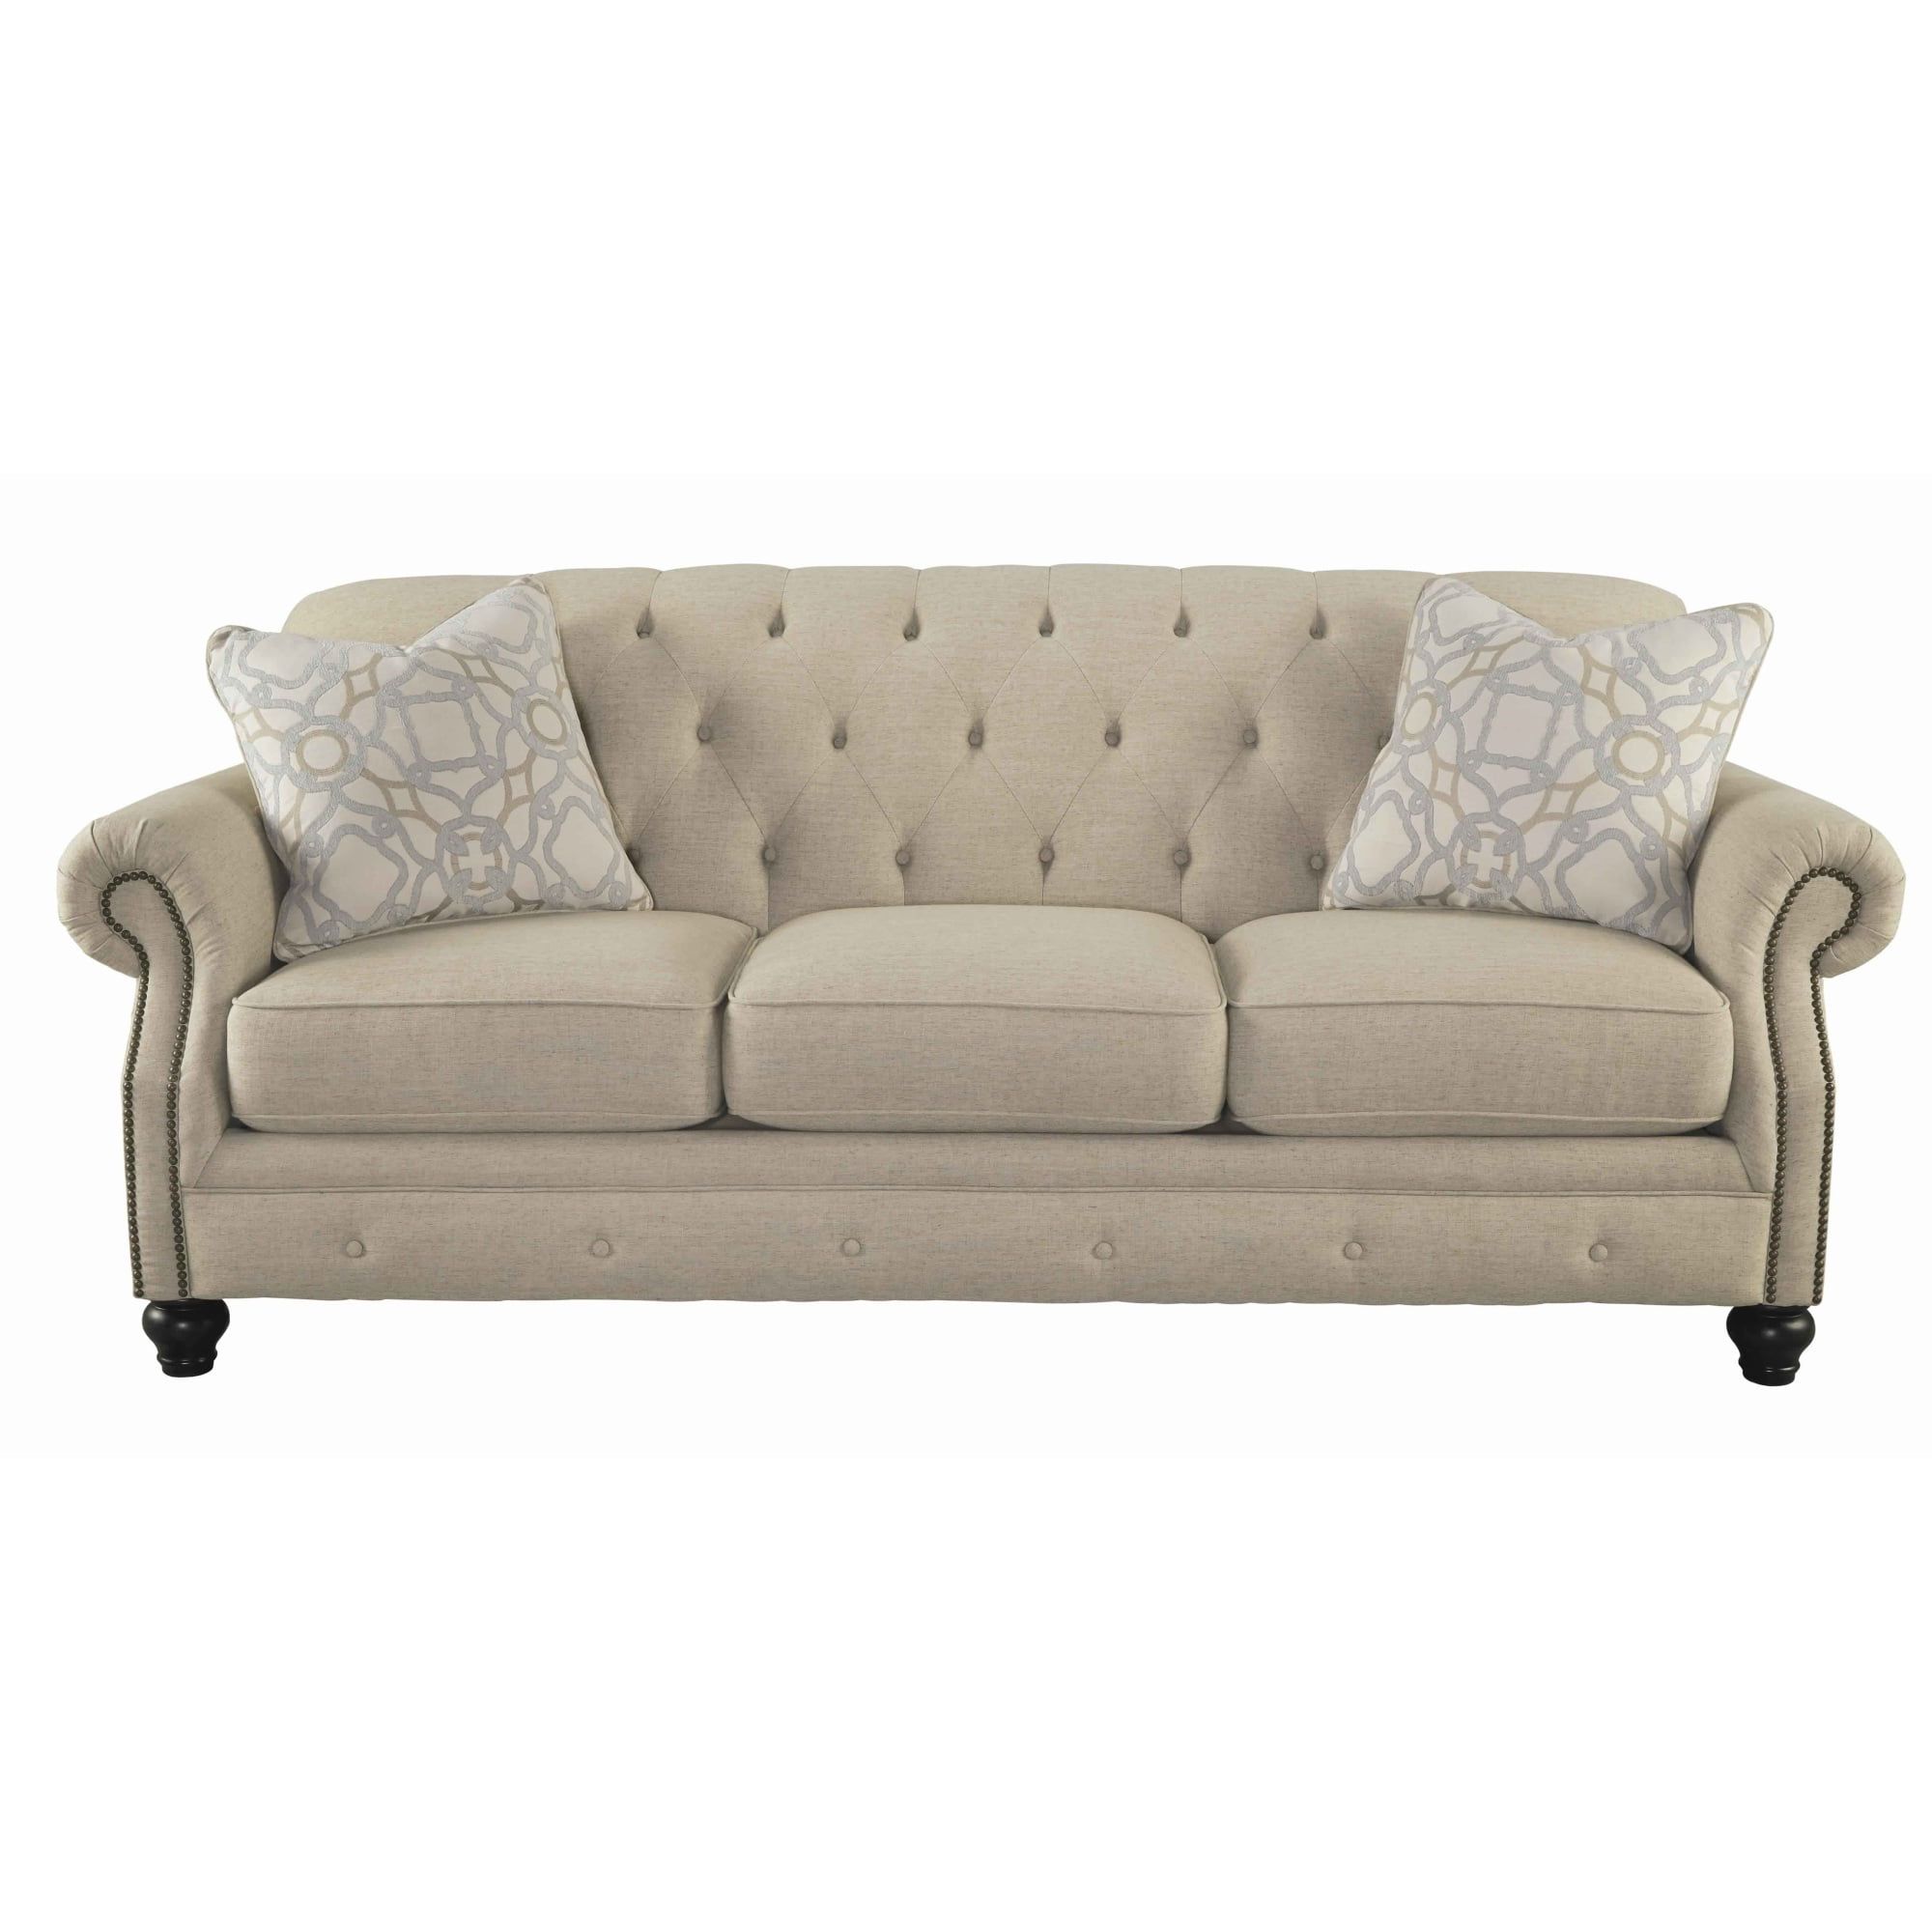 Chesterfield Design Fabric Upholstered Sofa With Button Tufted Back Inside Fashionable Tufted Upholstered Sofas (View 7 of 15)